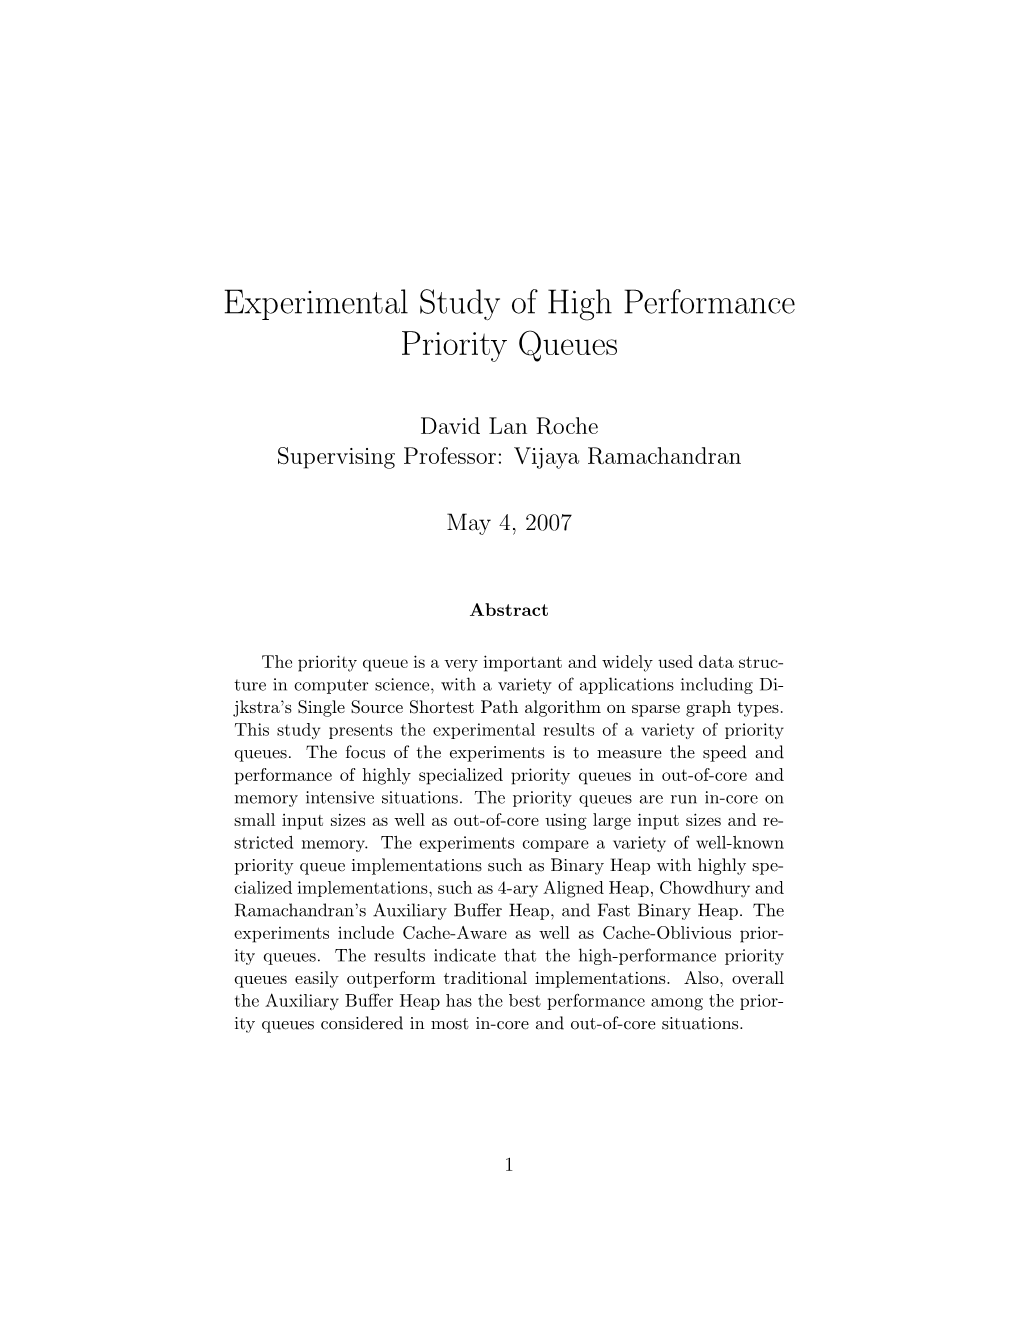 Experimental Study of High Performance Priority Queues